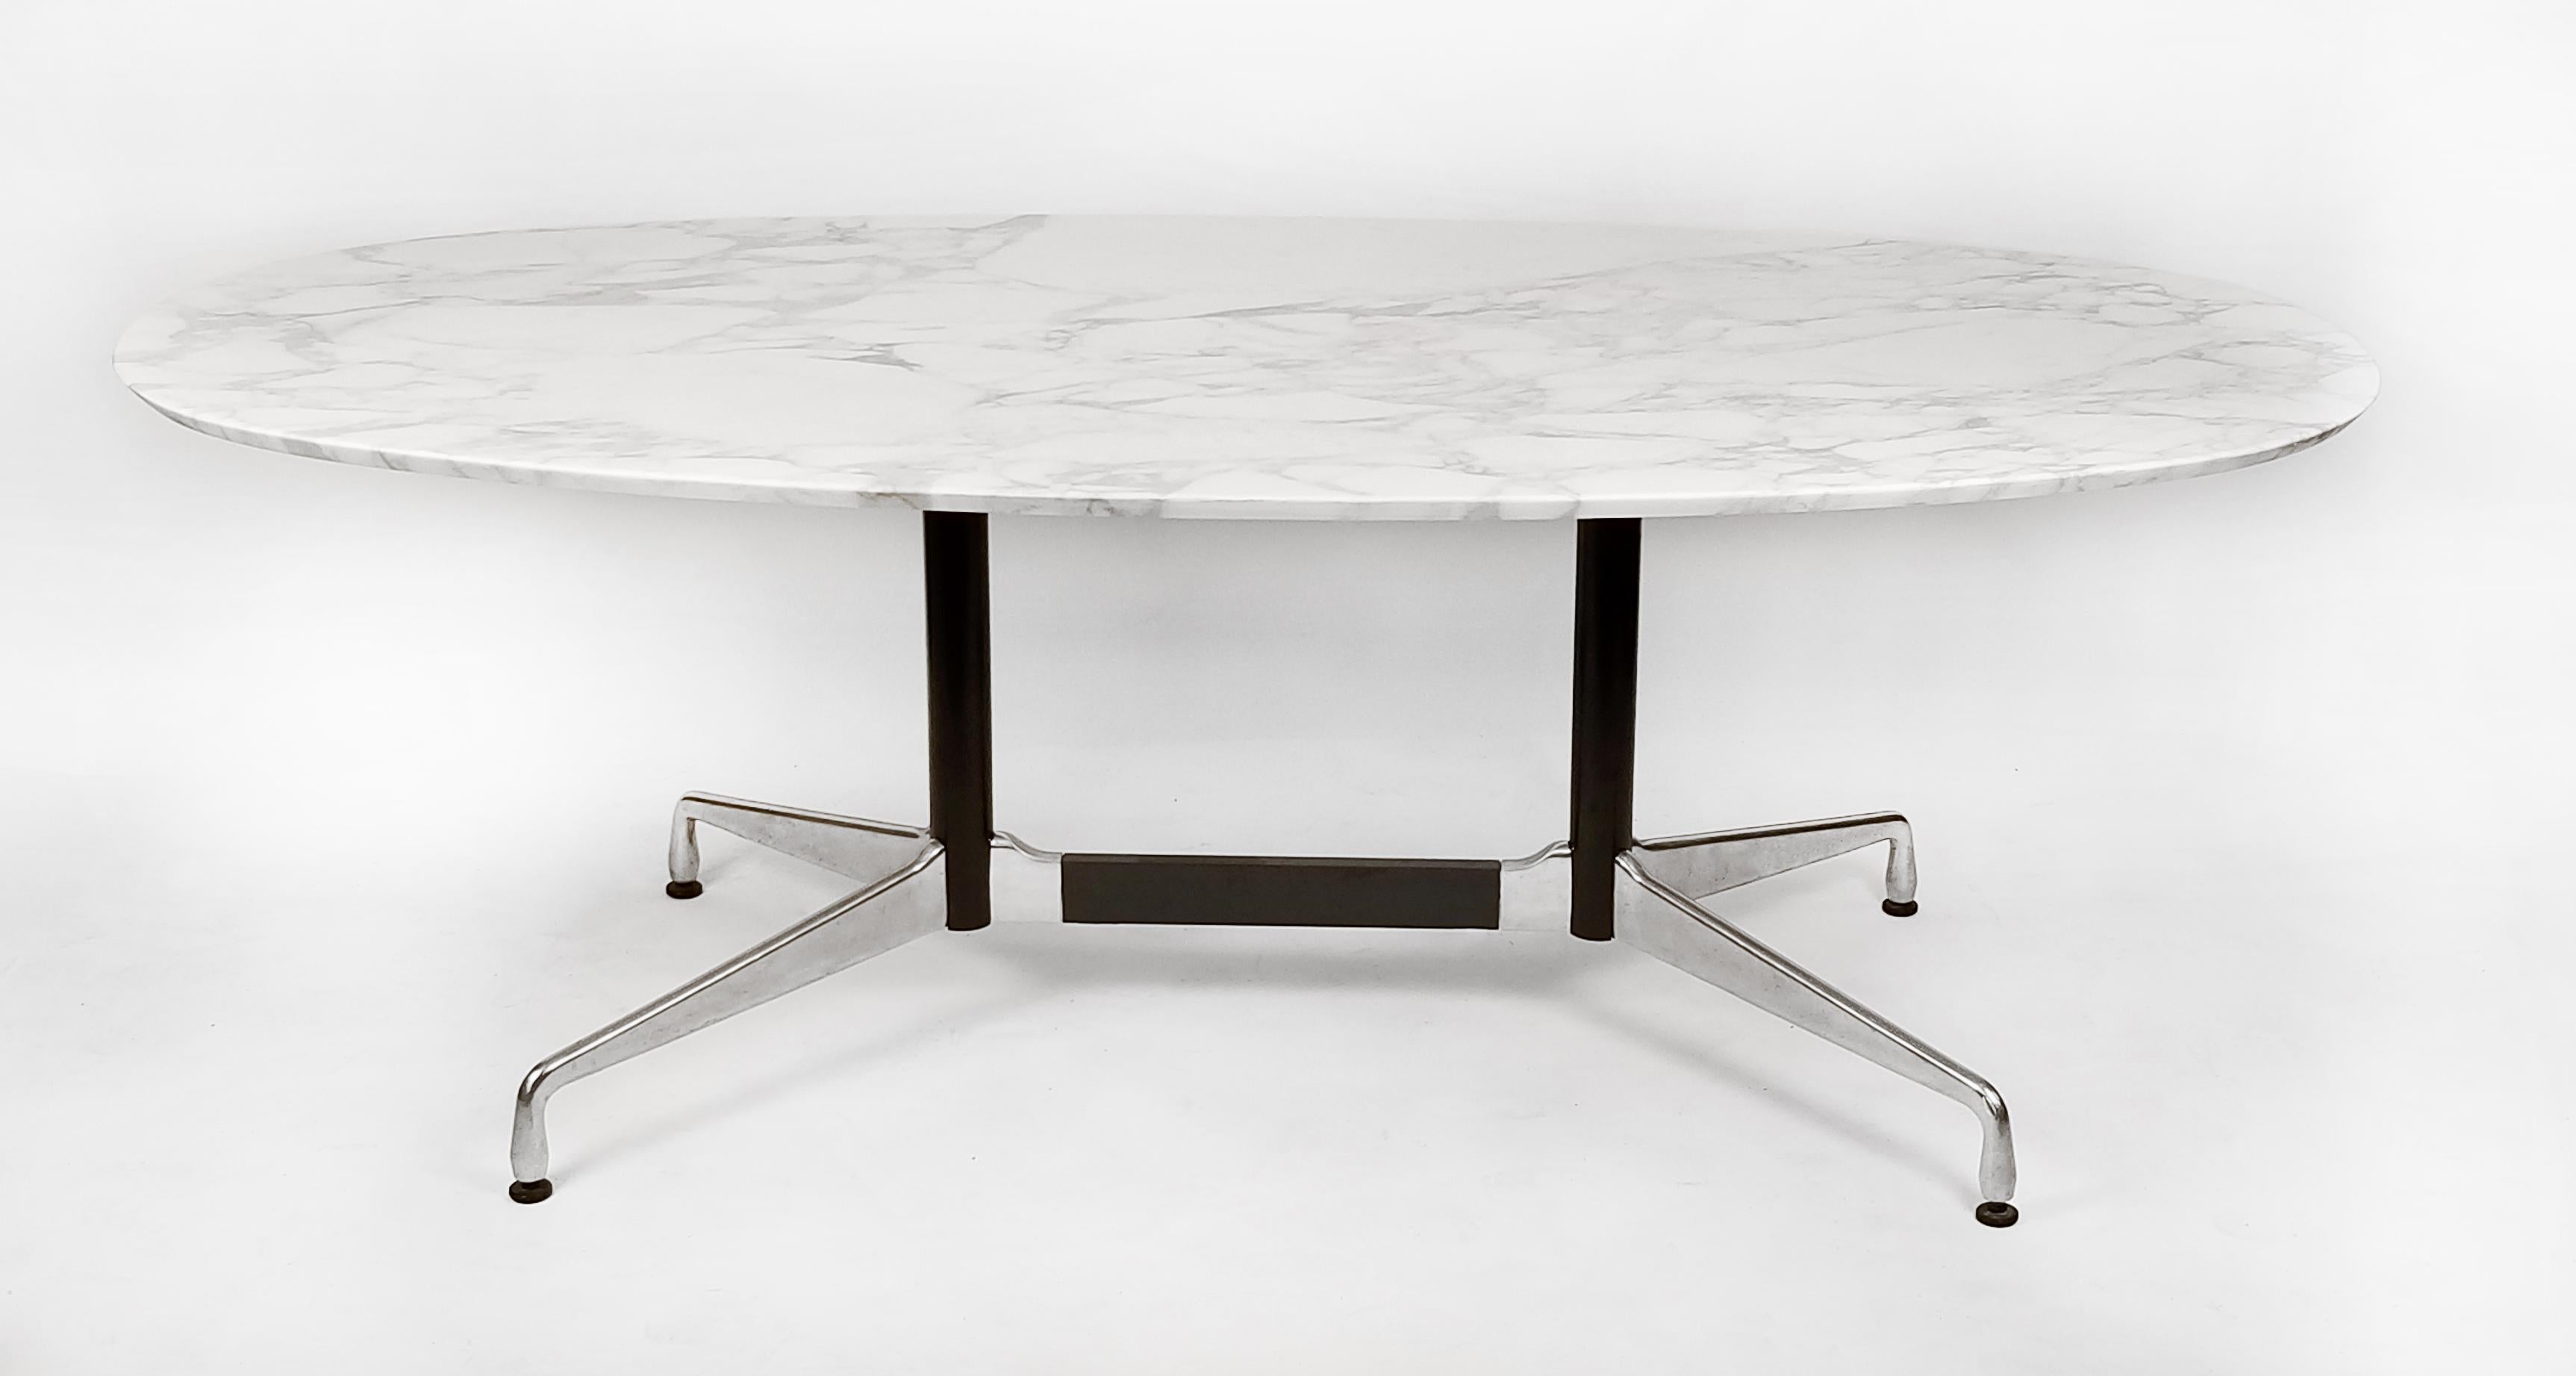 1960s Charles Eames for Herman Miller Aluminum Group table desk with Beveled Calacatta marble top. No chips. Beautiful veining. Designed by the grand master of modernism, this table does not disappoint.